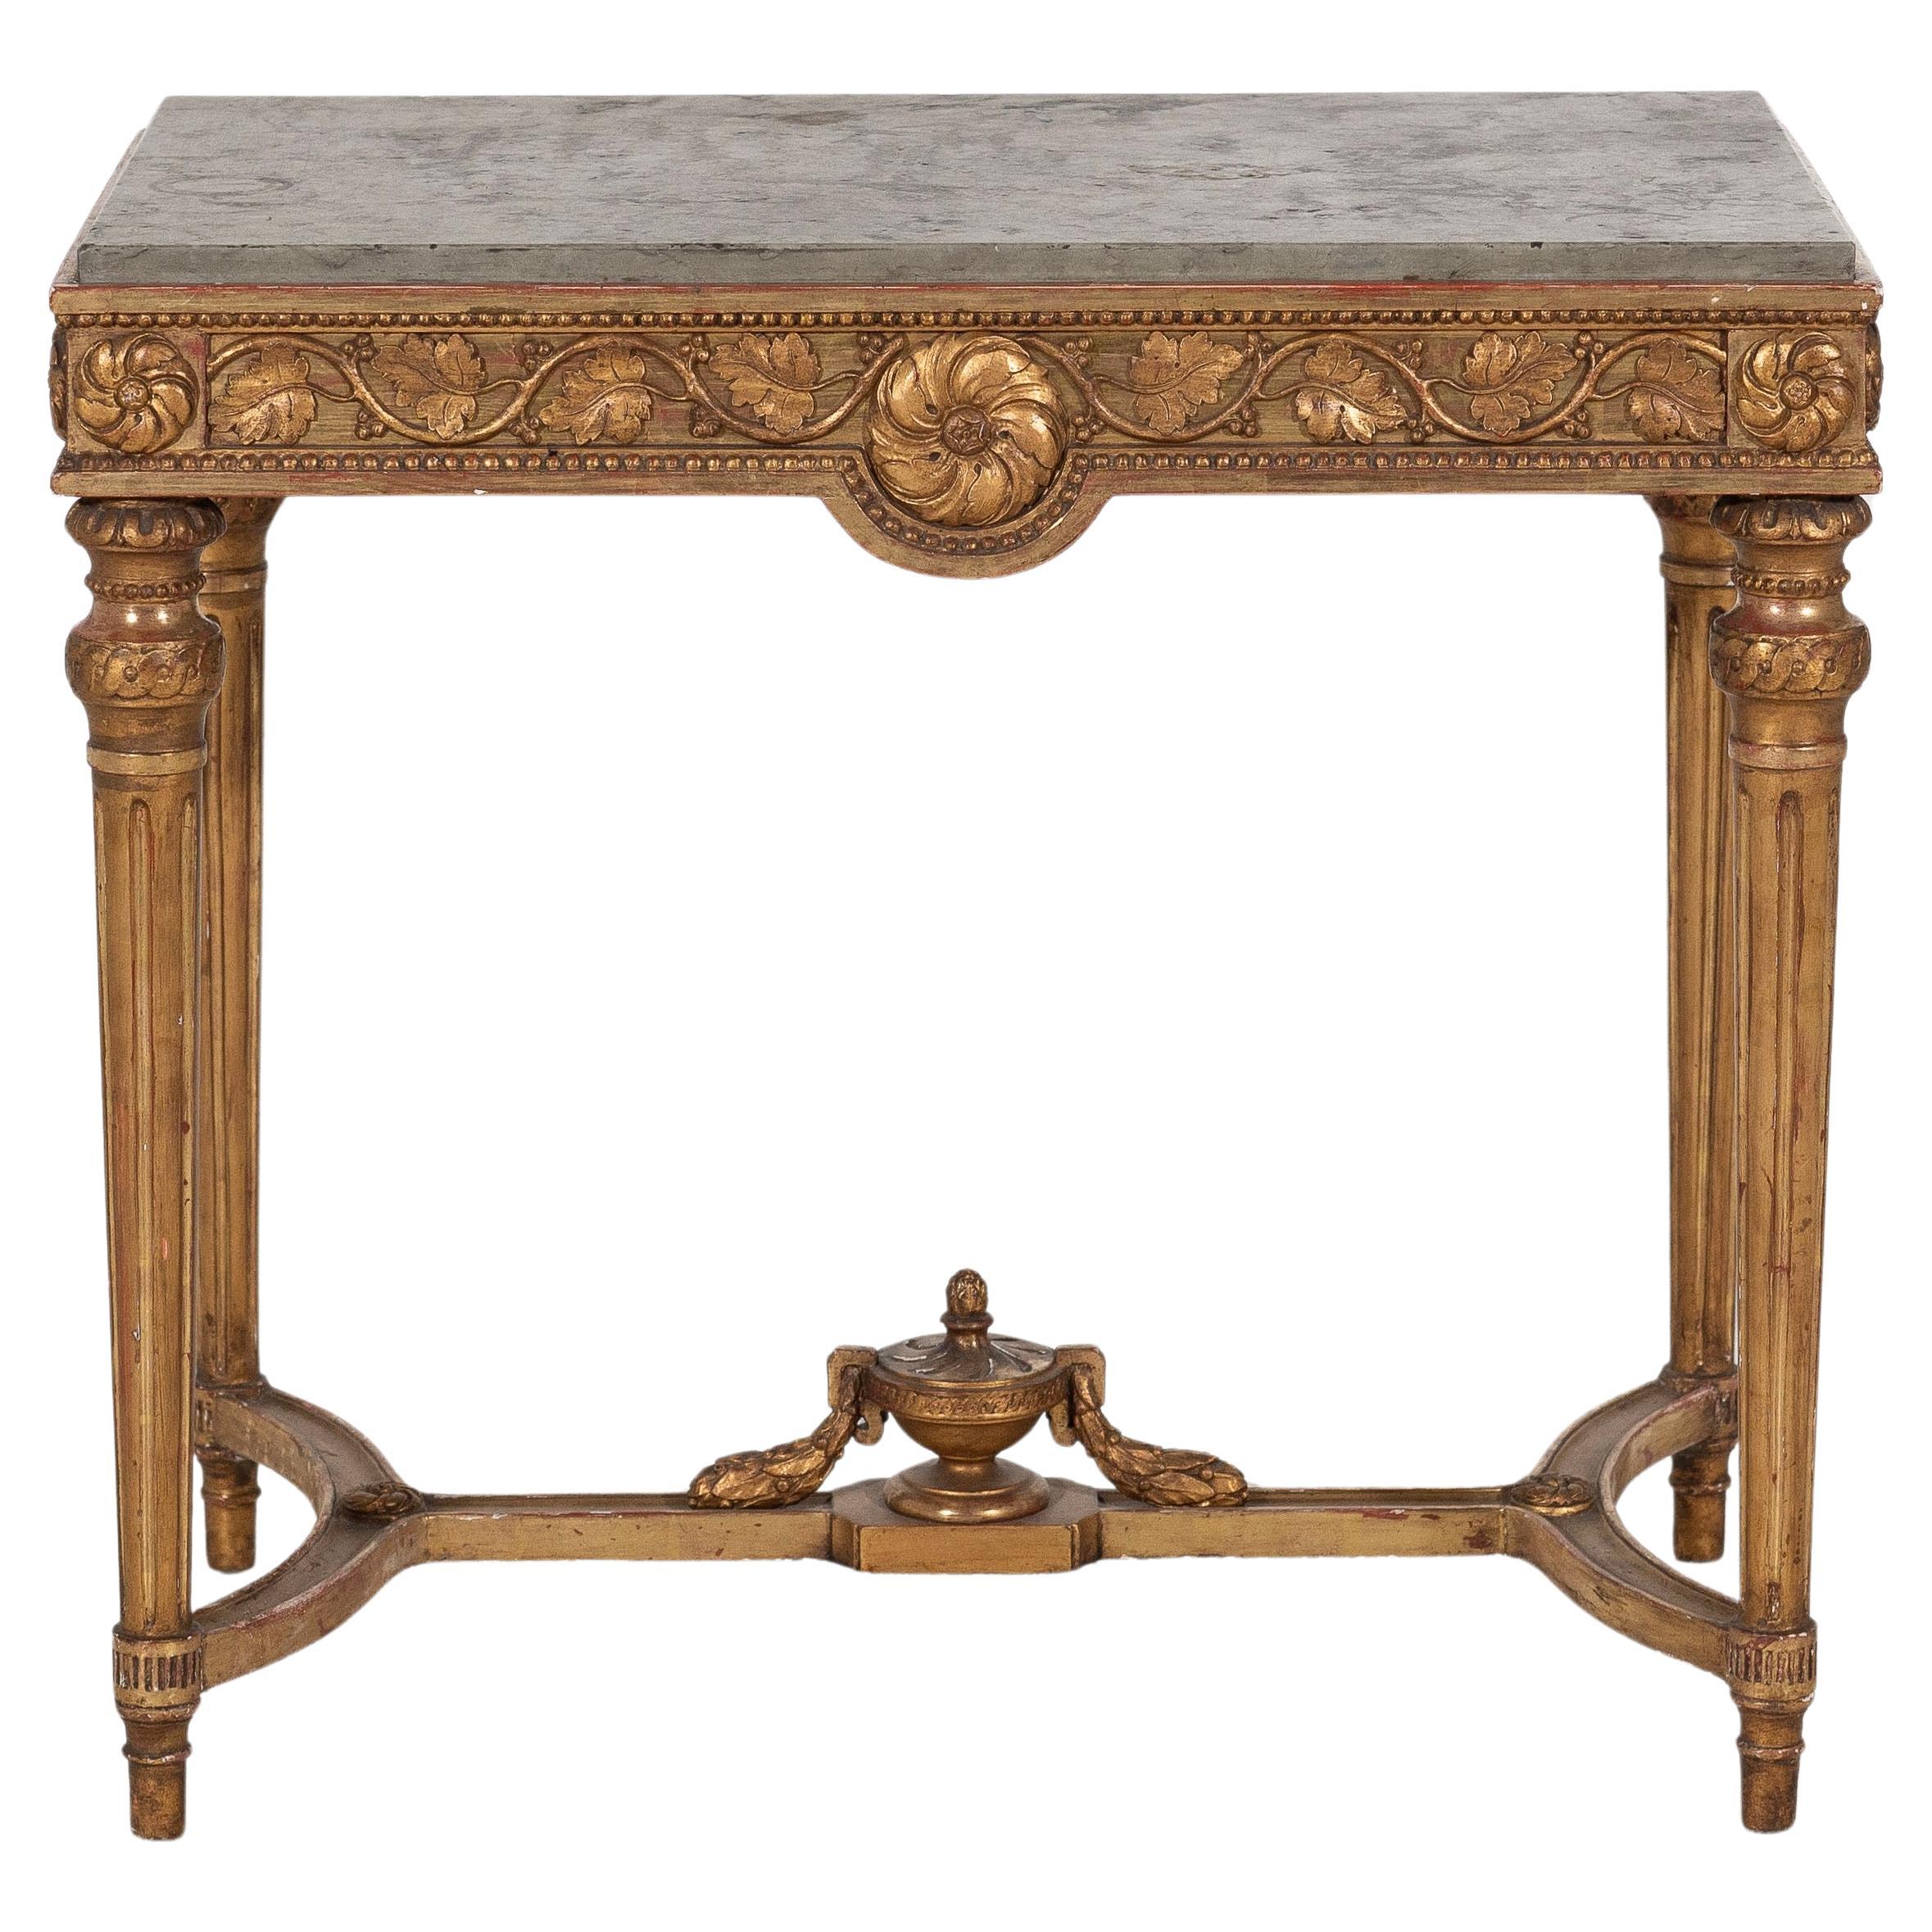 Freestanding Gustavian console table in original guilt, 18th C.